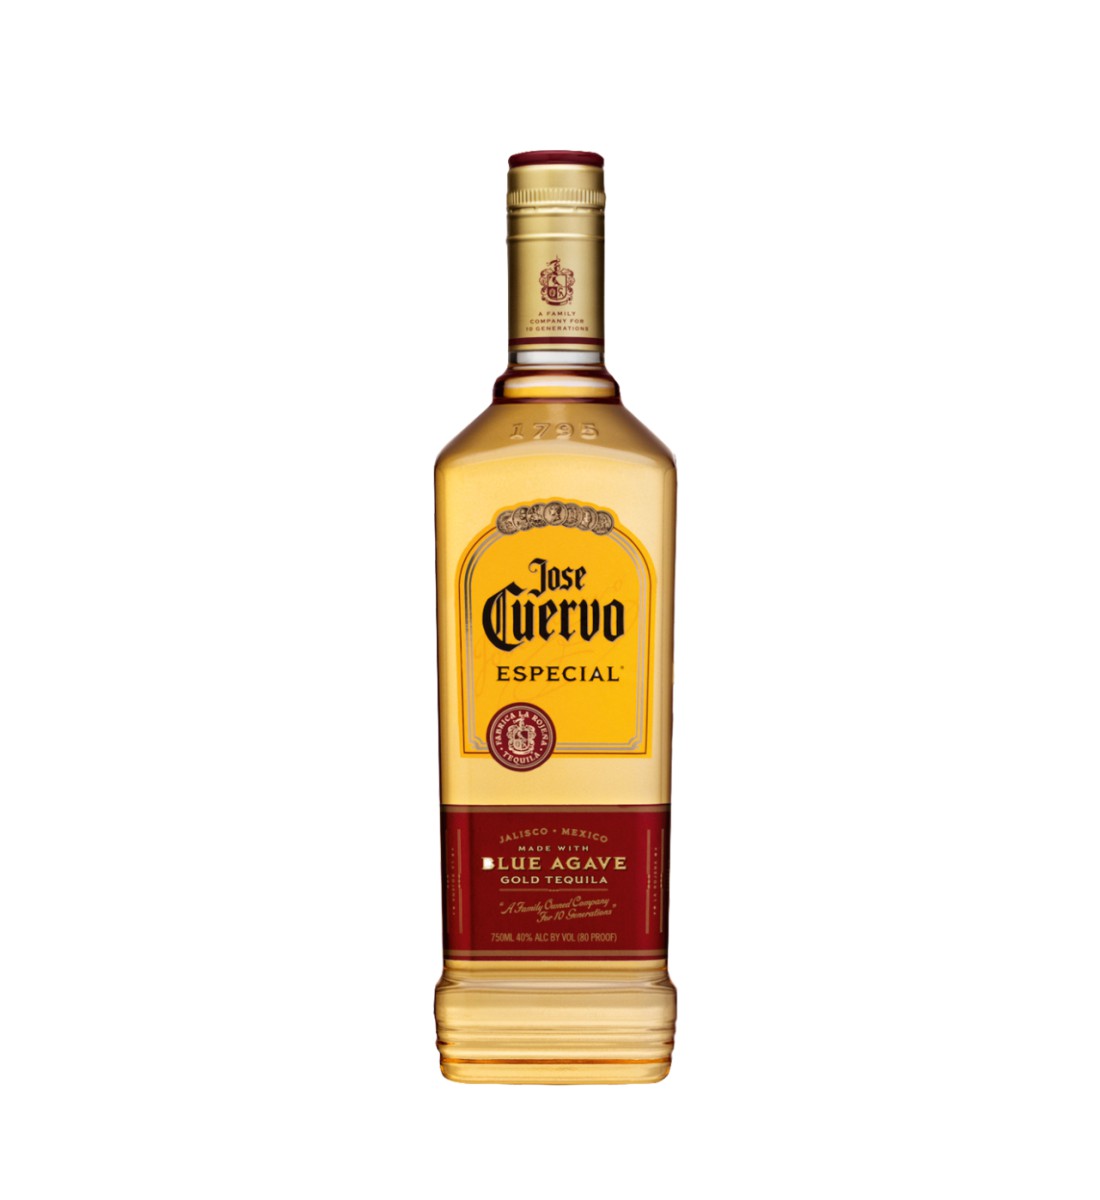 Tequila Jose Cuervo Especial Gold 1L bauturialcoolice.ro